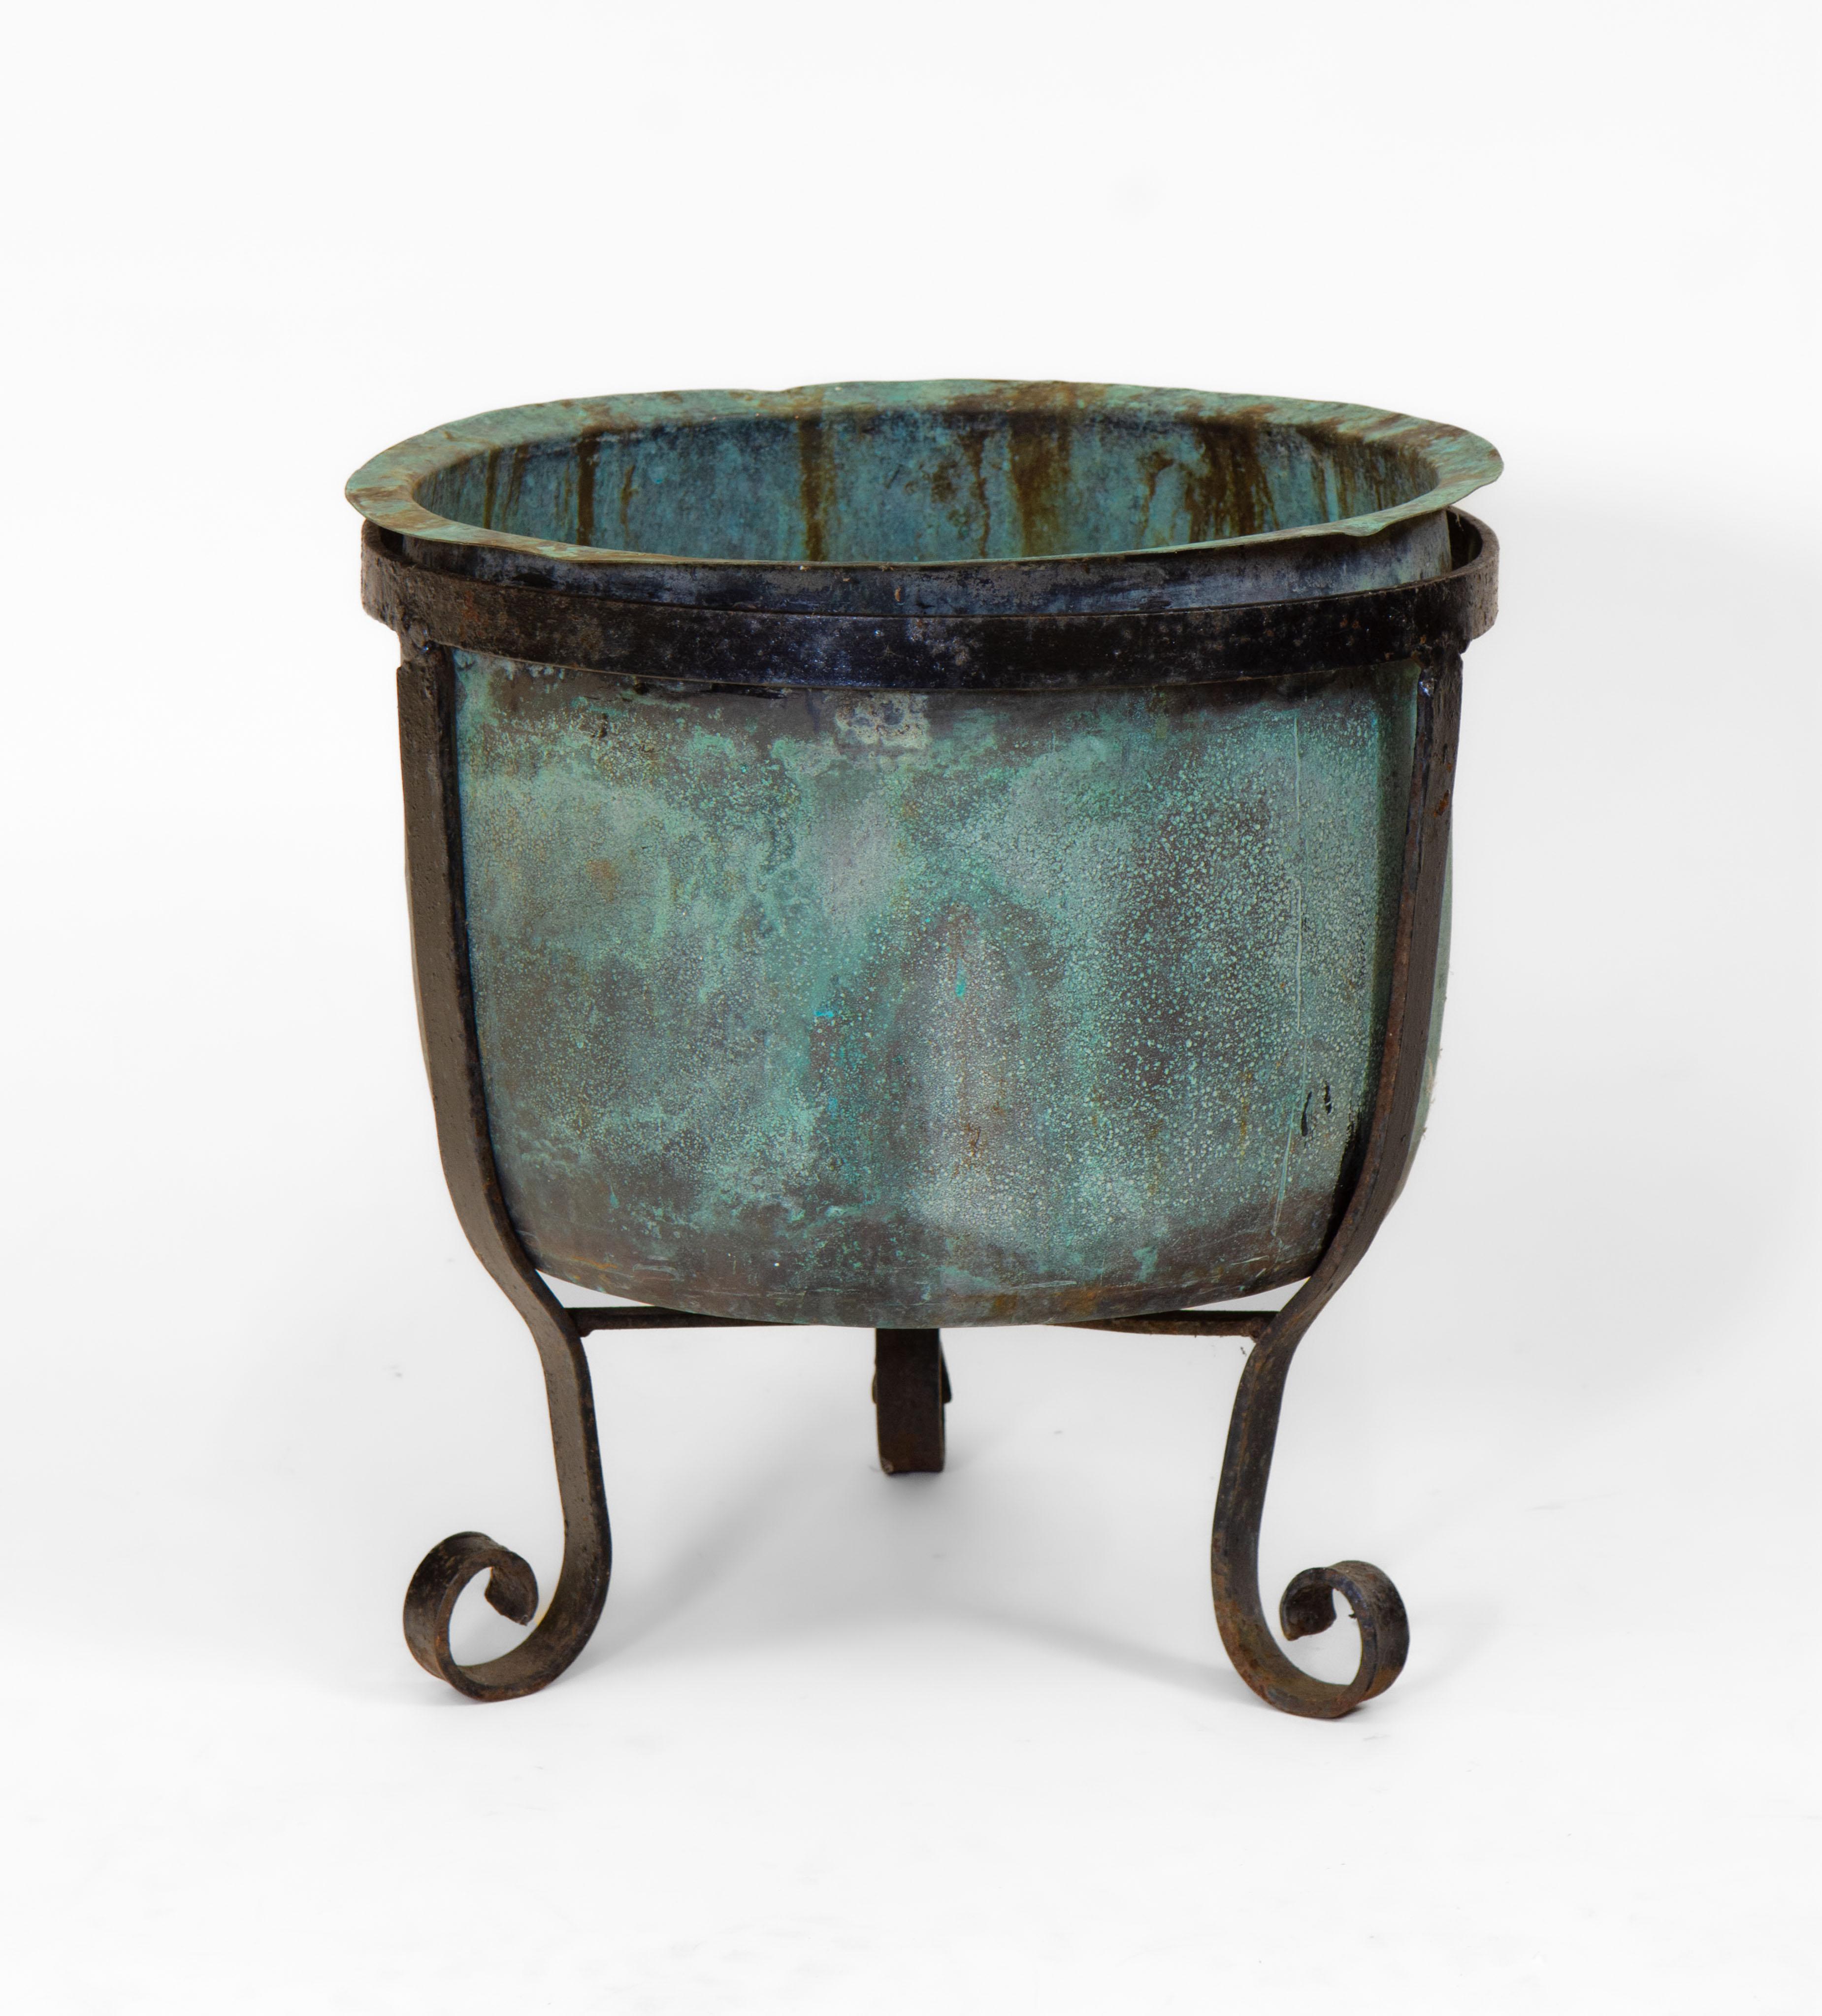 Hand-Crafted 19th Century English Copper Verdigris Planter On Wrought Iron Stand